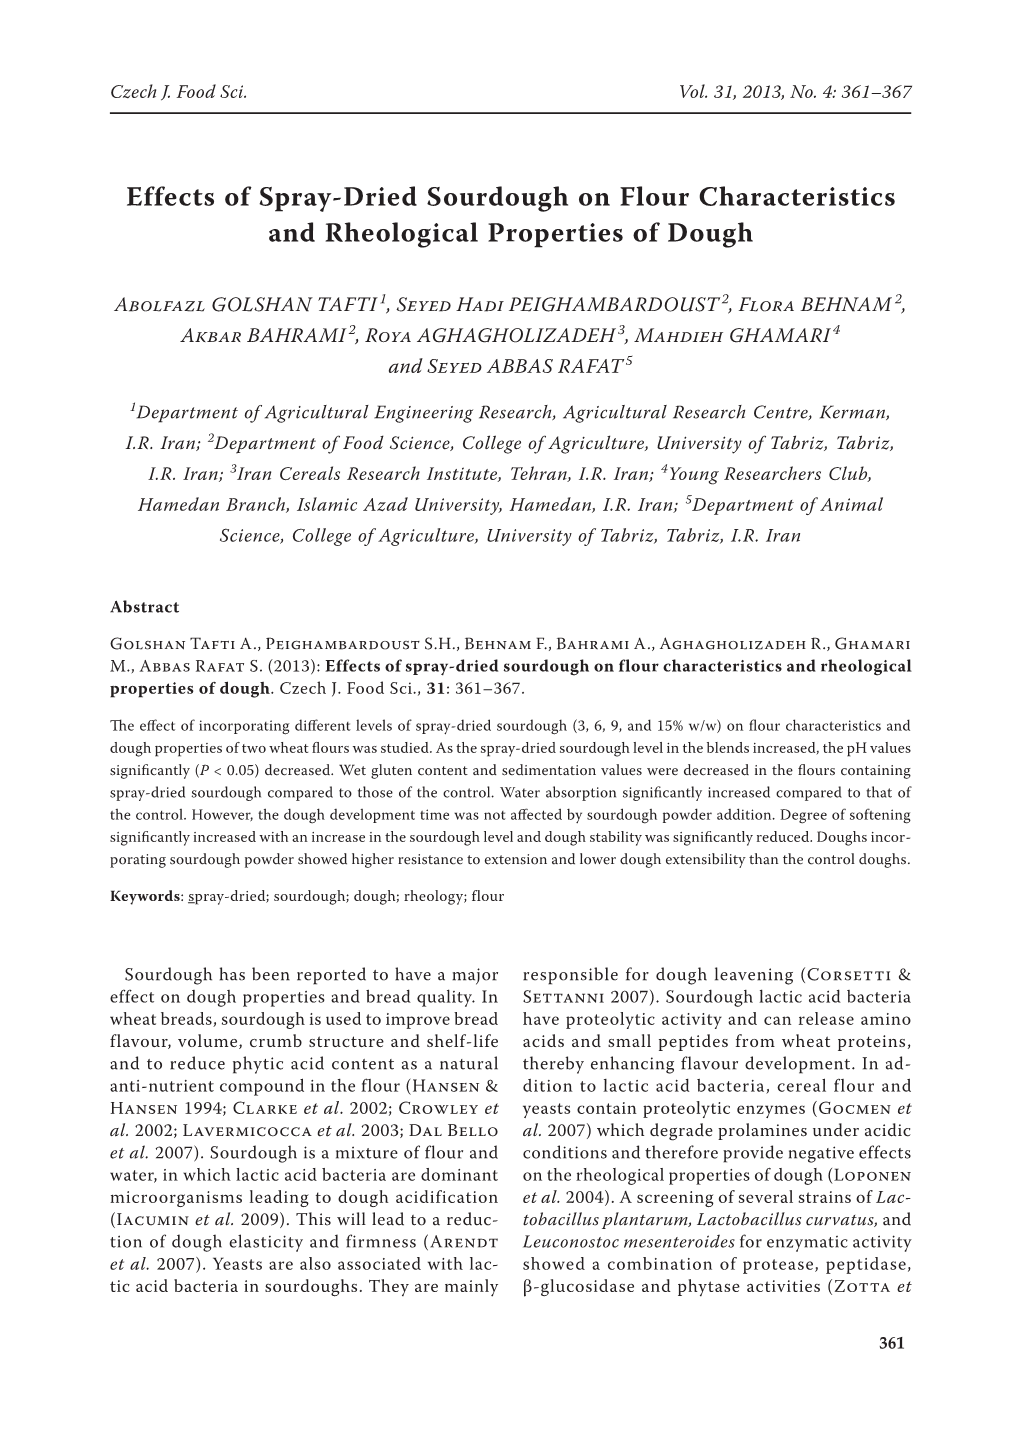 Effects of Spray-Dried Sourdough on Flour Characteristics and Rheological Properties of Dough